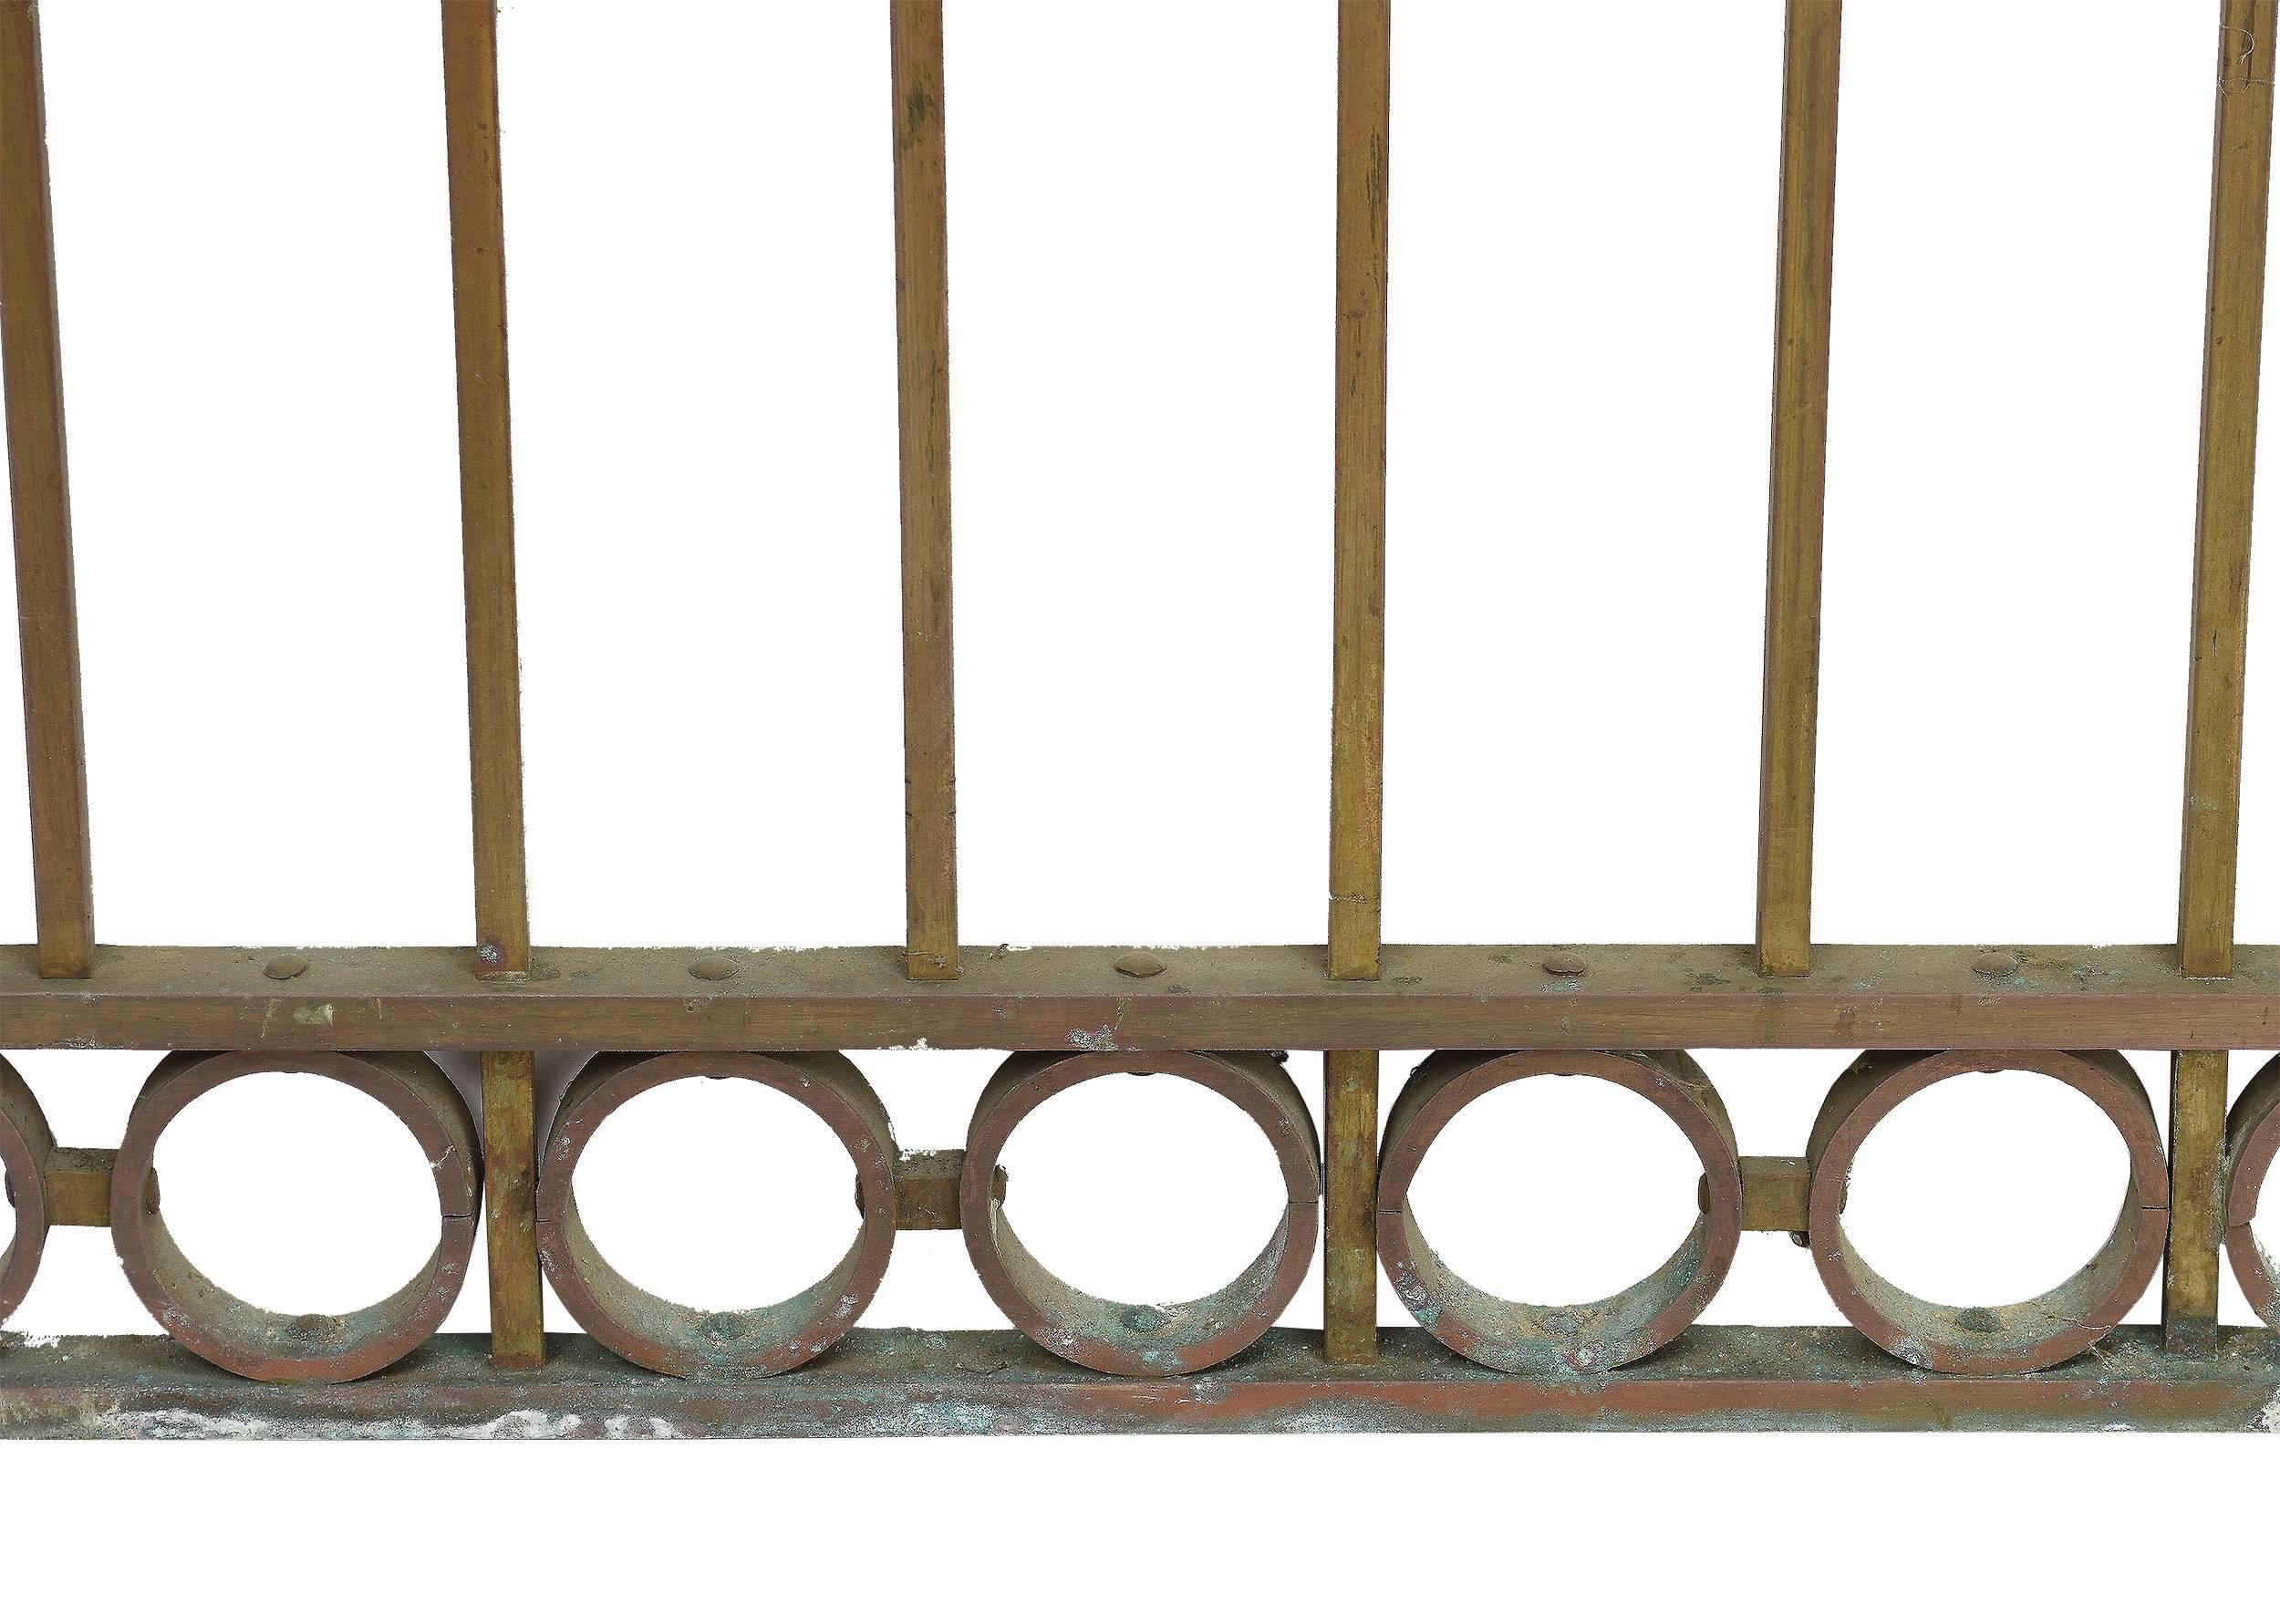 You won't find teller window gates like these at any modern bank! Made of cast bronze, they feature square bars running the length of the gate and decorative curving details at the top and bottom.